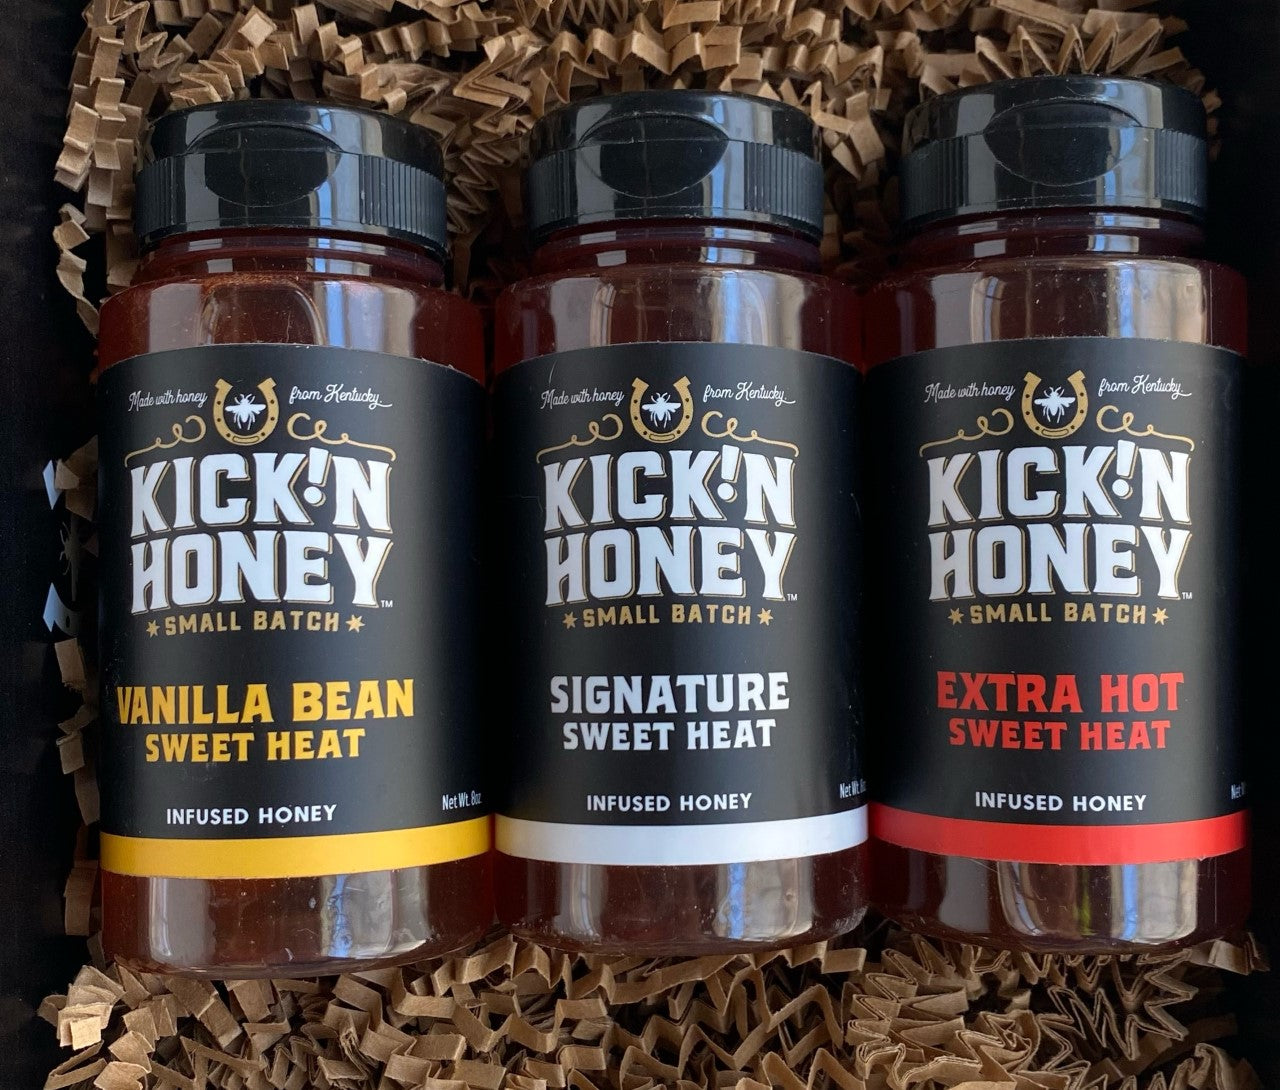 Kick'n Honey gift boxes make the perfect gift for the foodie, the BBQ aficionado or the guy or gal who loves to backyard grill. Our hot honey is much more than just hot, it's a flavor booster that enhances your food with the perfect balance of sweet heat goodness. Kick'in Hot Honey brings the flavor